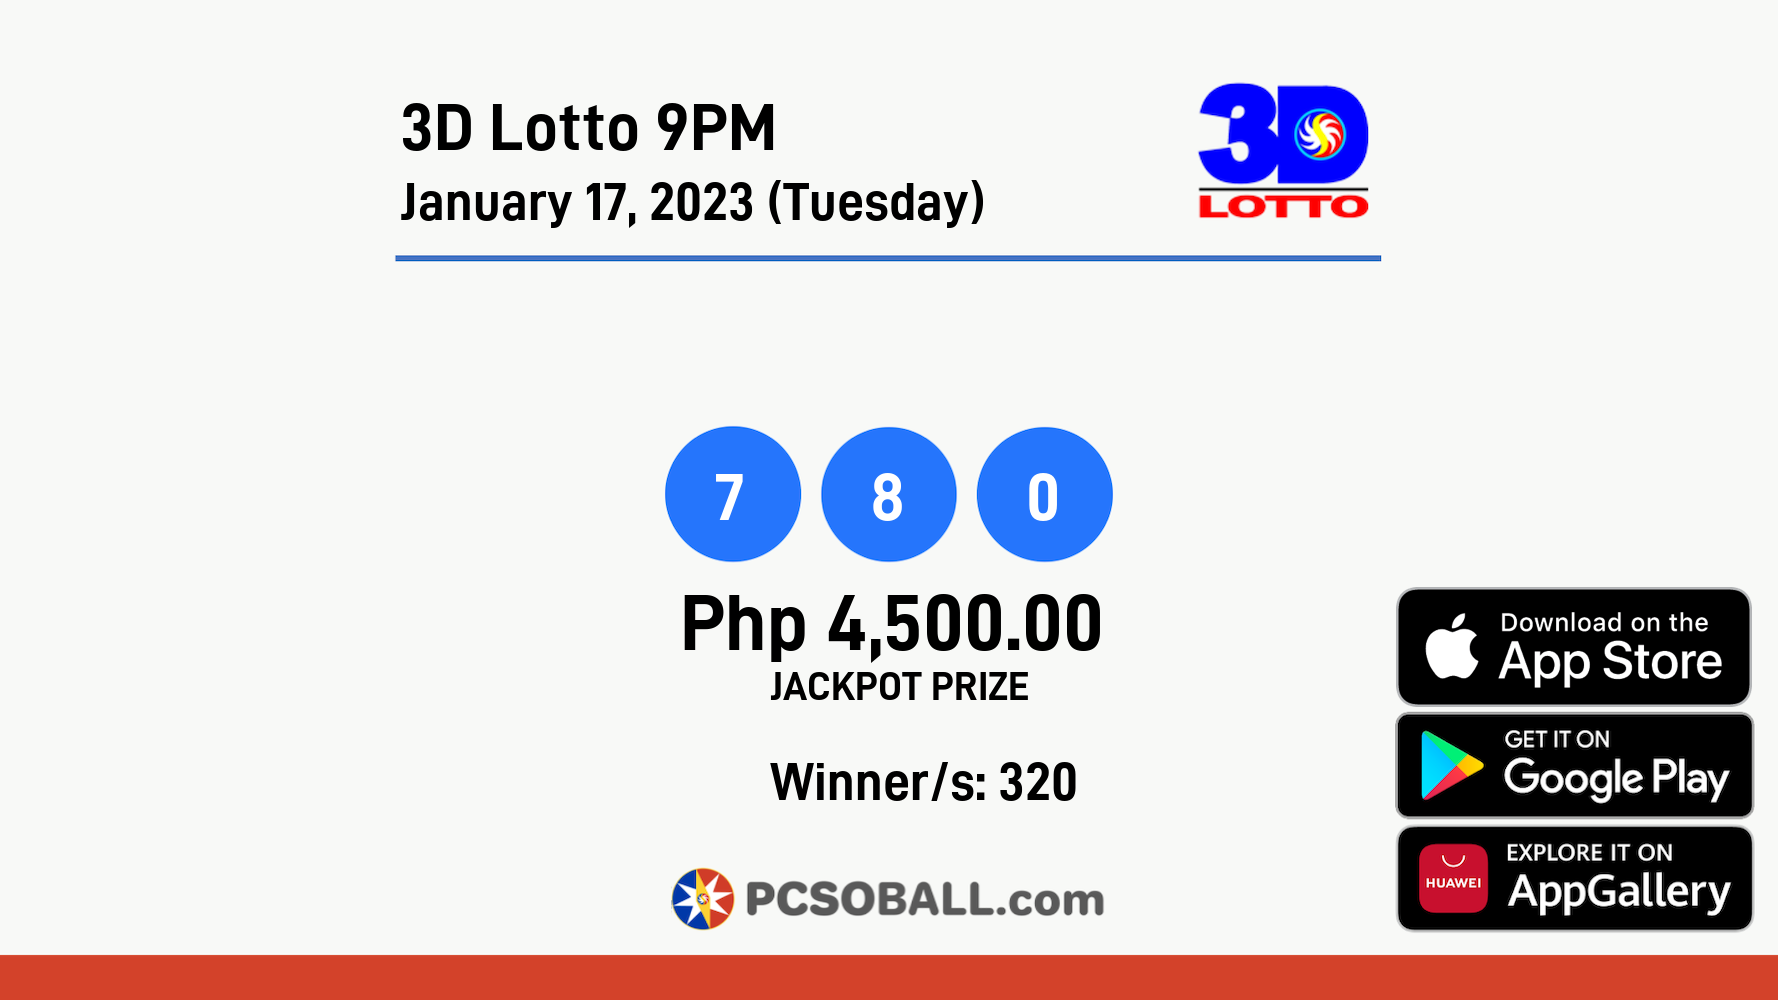 3D Lotto 9PM January 17, 2023 (Tuesday) Result